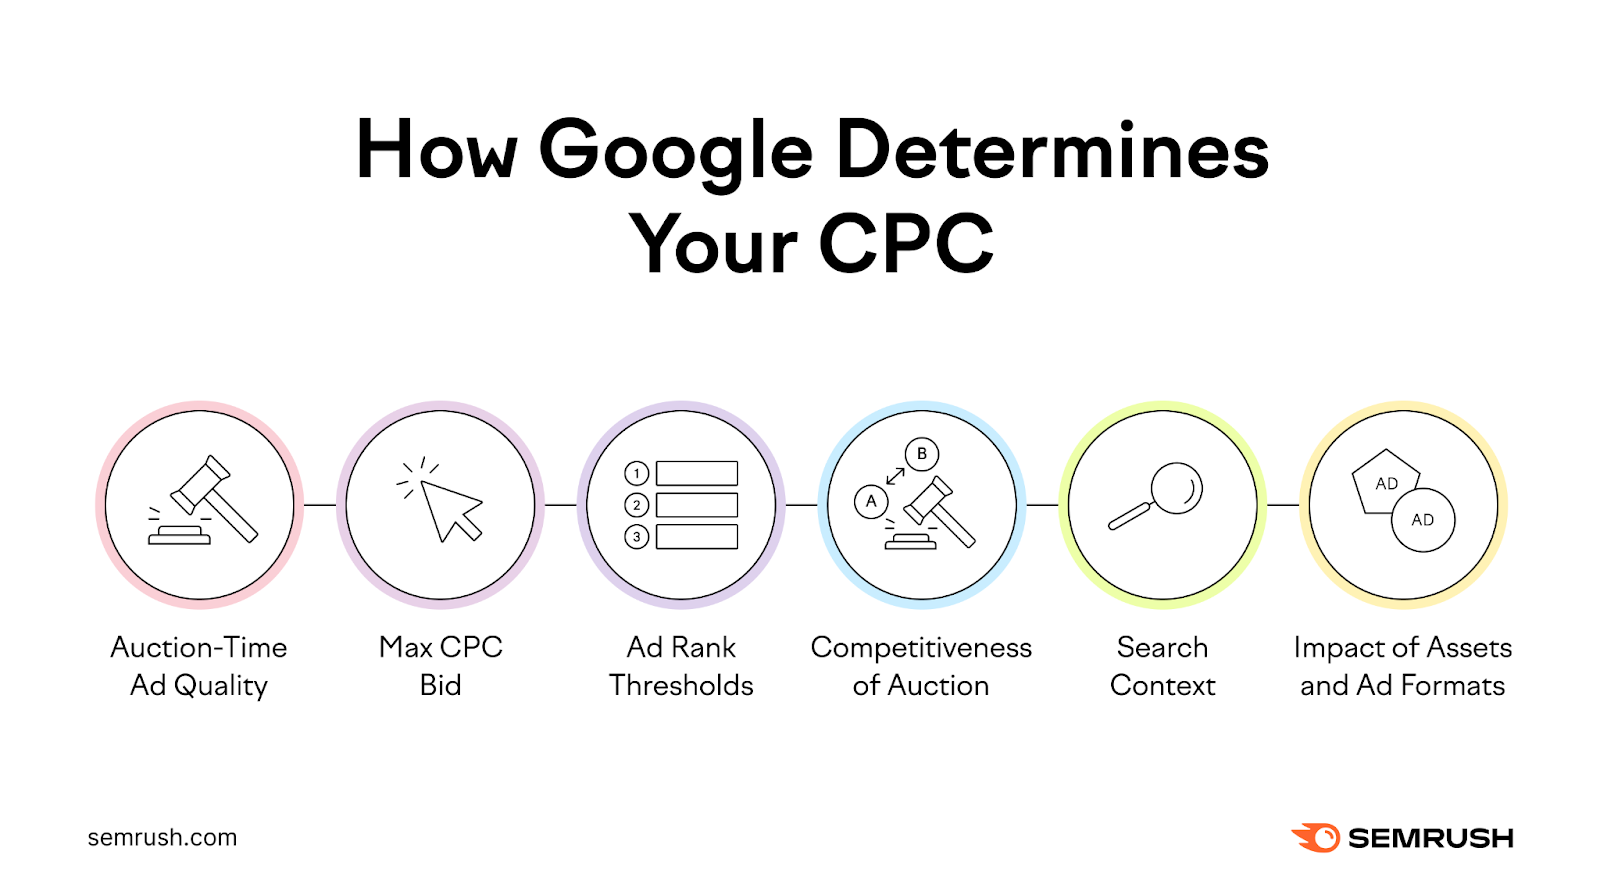 How Google determines your CPC